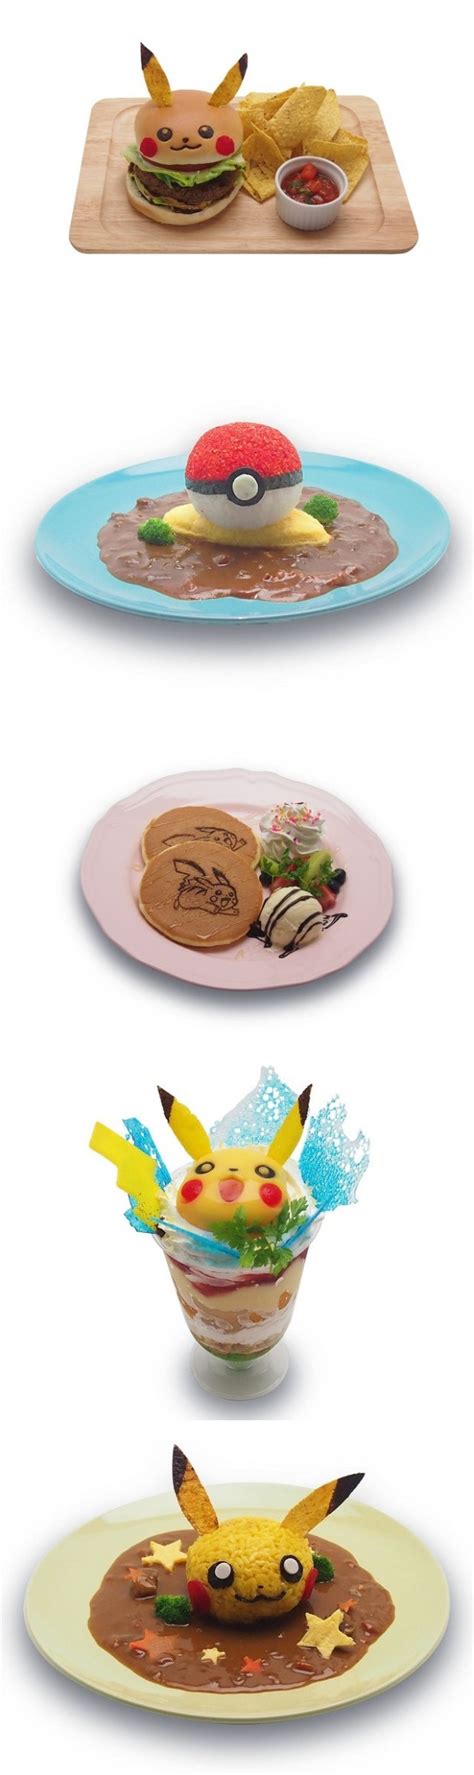 Pokemon Dishes From The Pikachu Cafe In Roppongi Japan Looks So